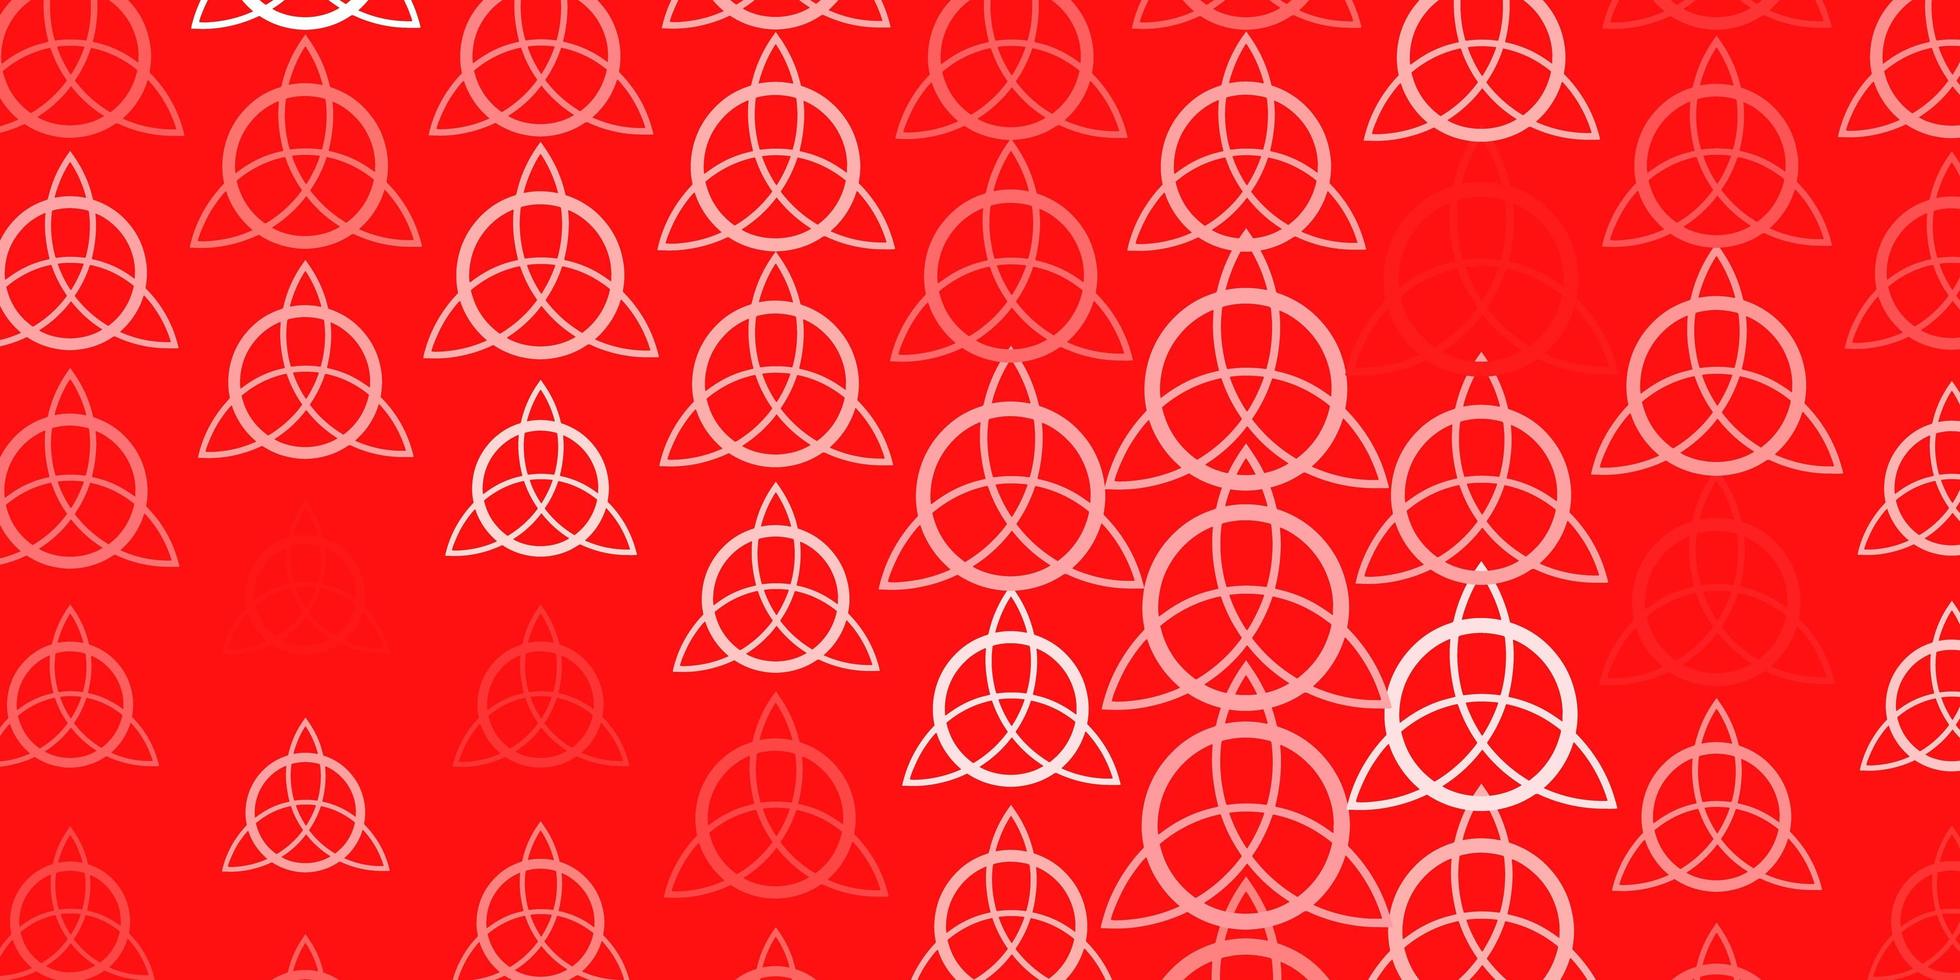 Light Red vector background with occult symbols.